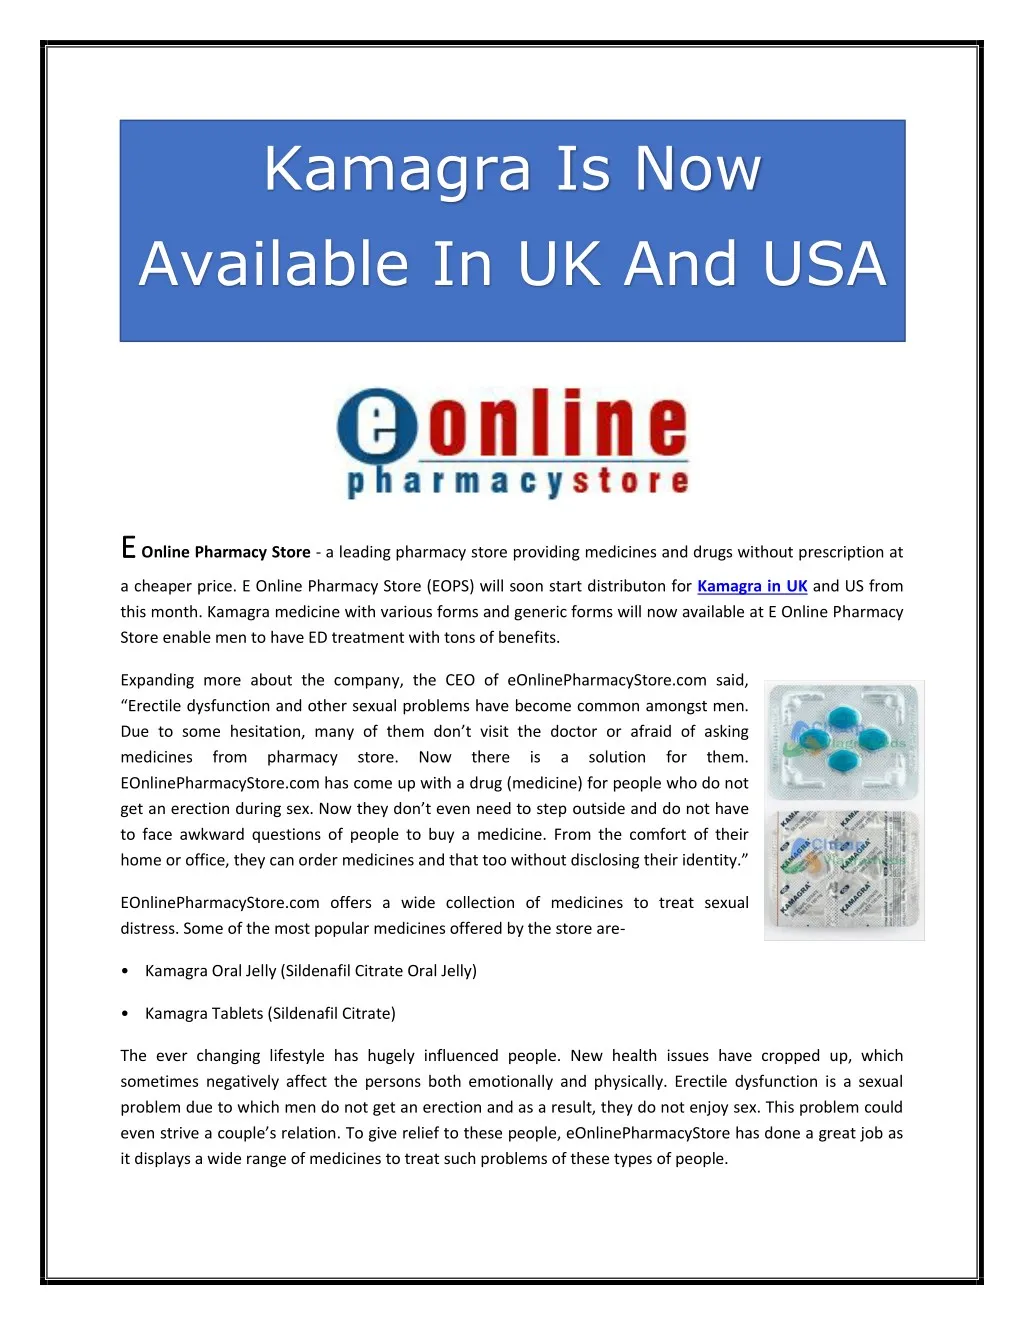 kamagra is now available in uk and usa